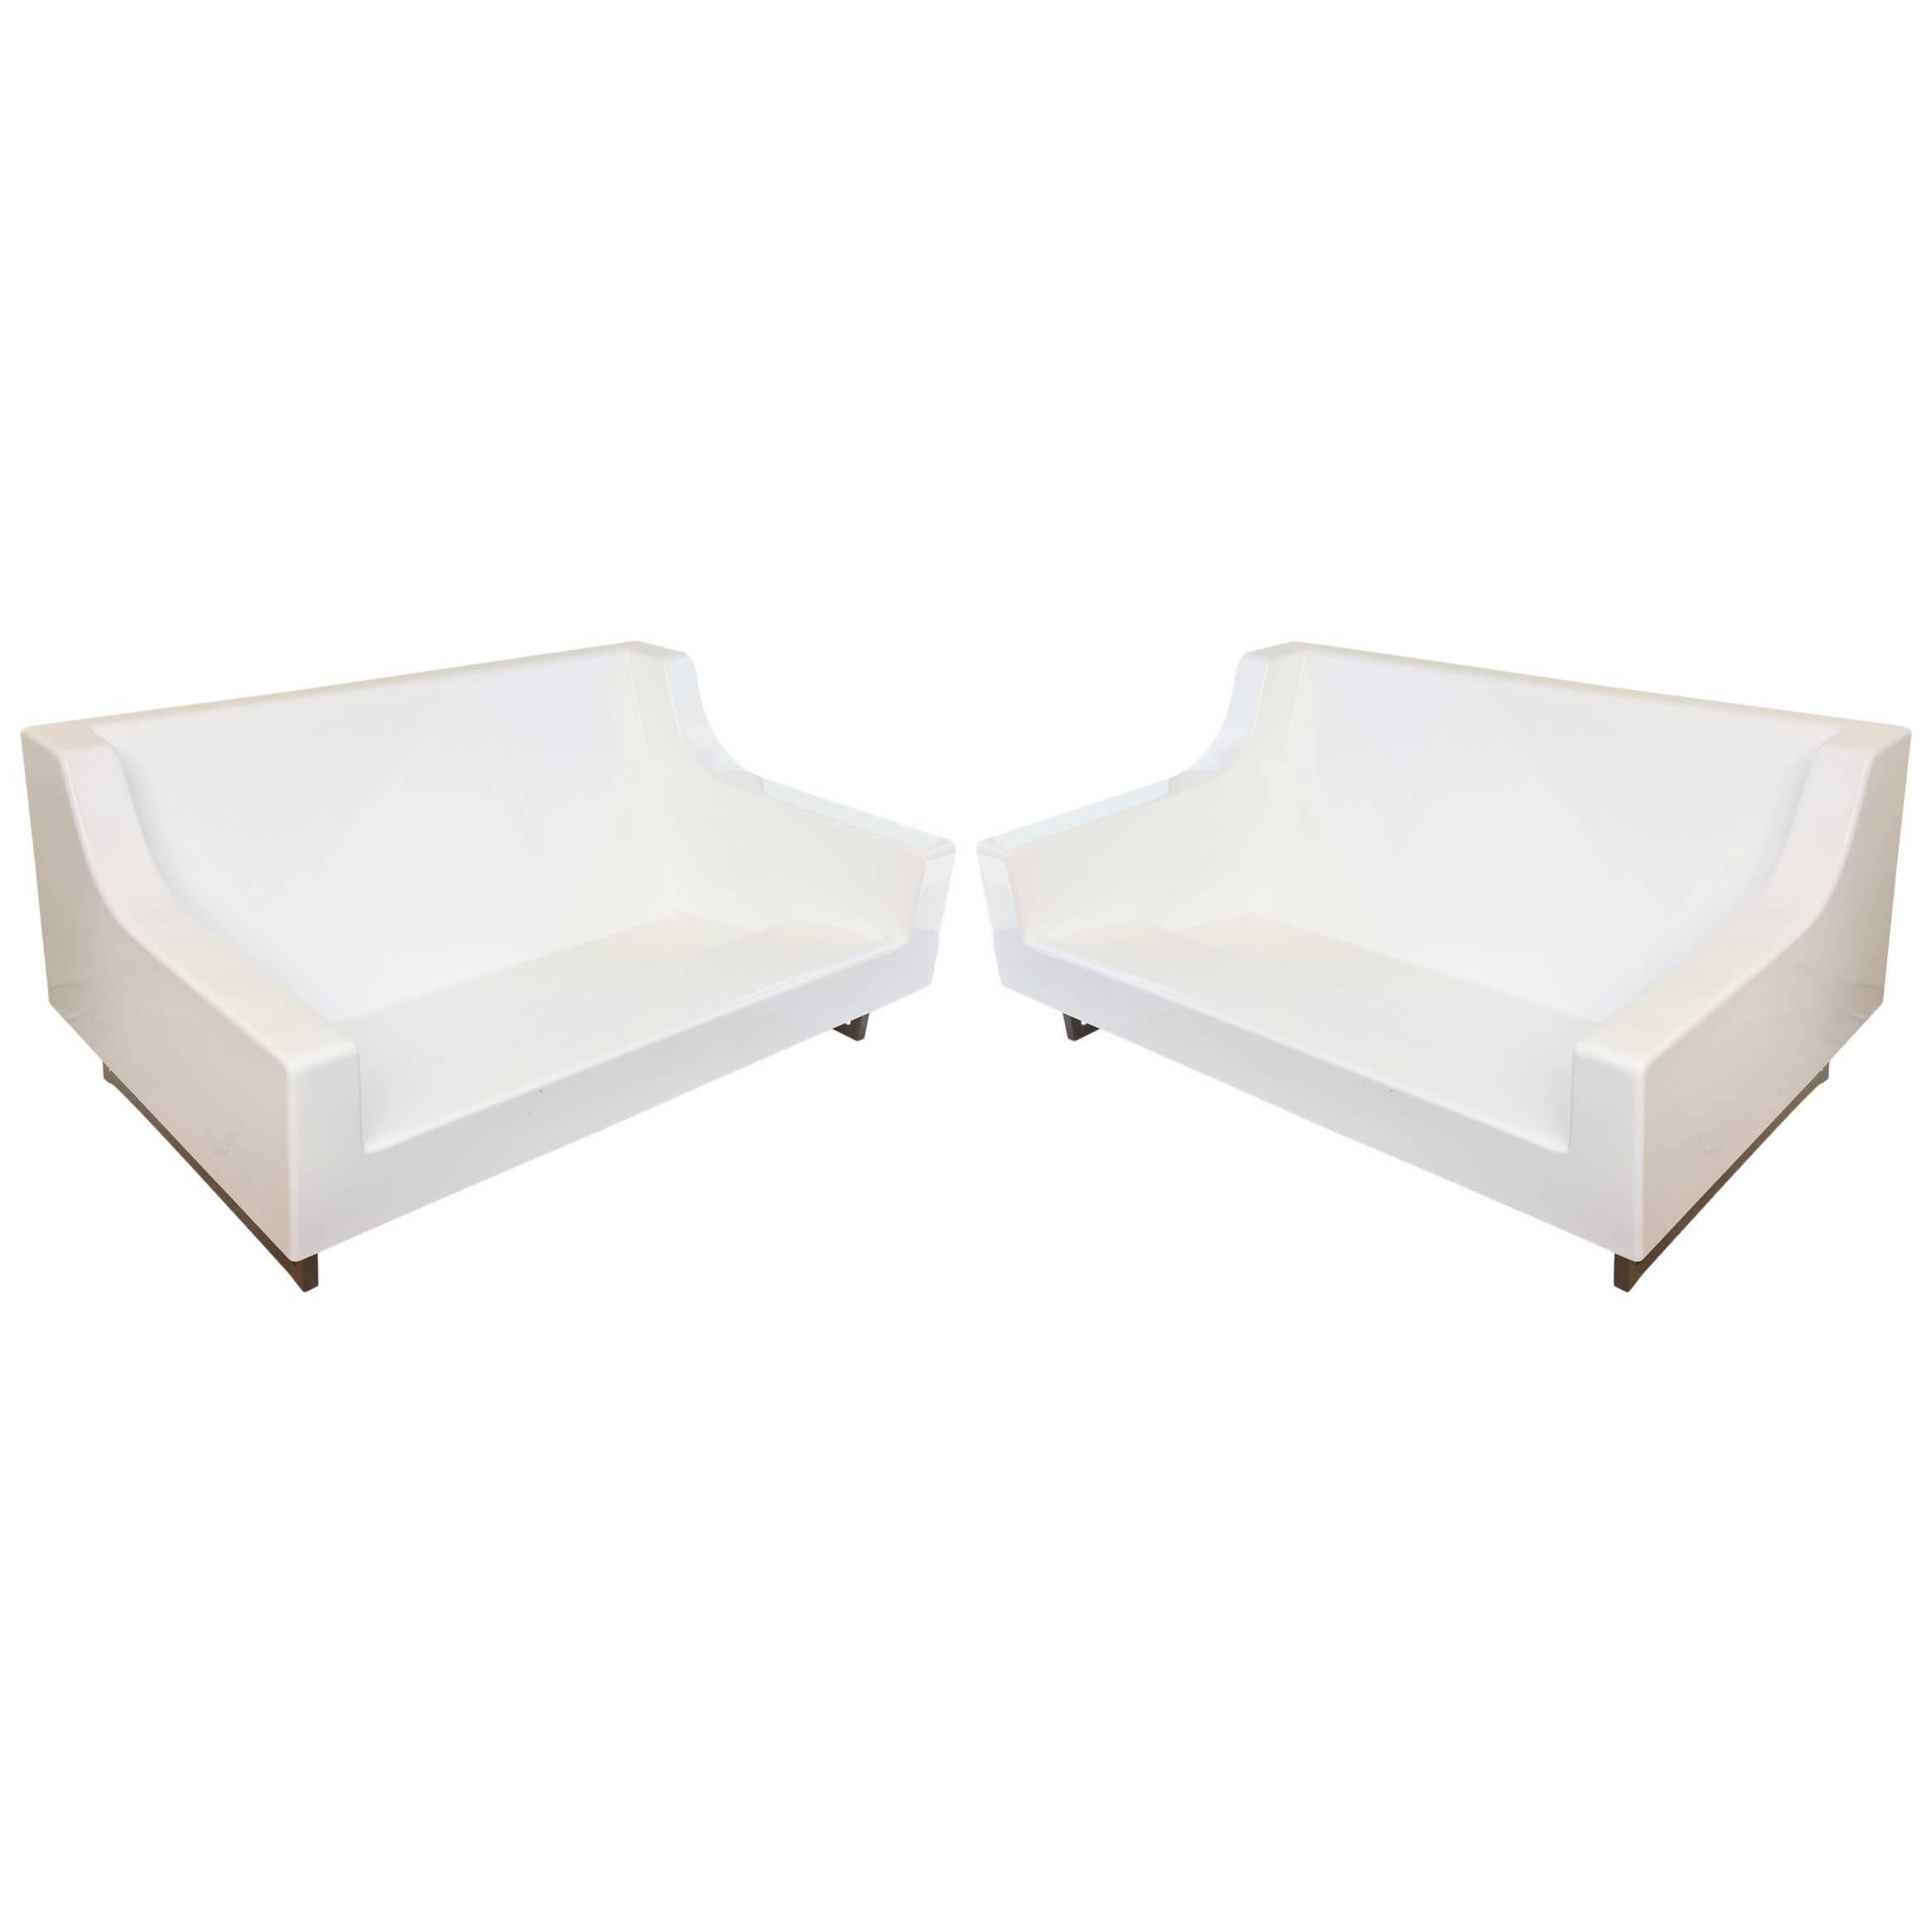 Pair of Indoor/Outdoor Sculptural White Lacquered Fiberglass Sofas or Loveseats